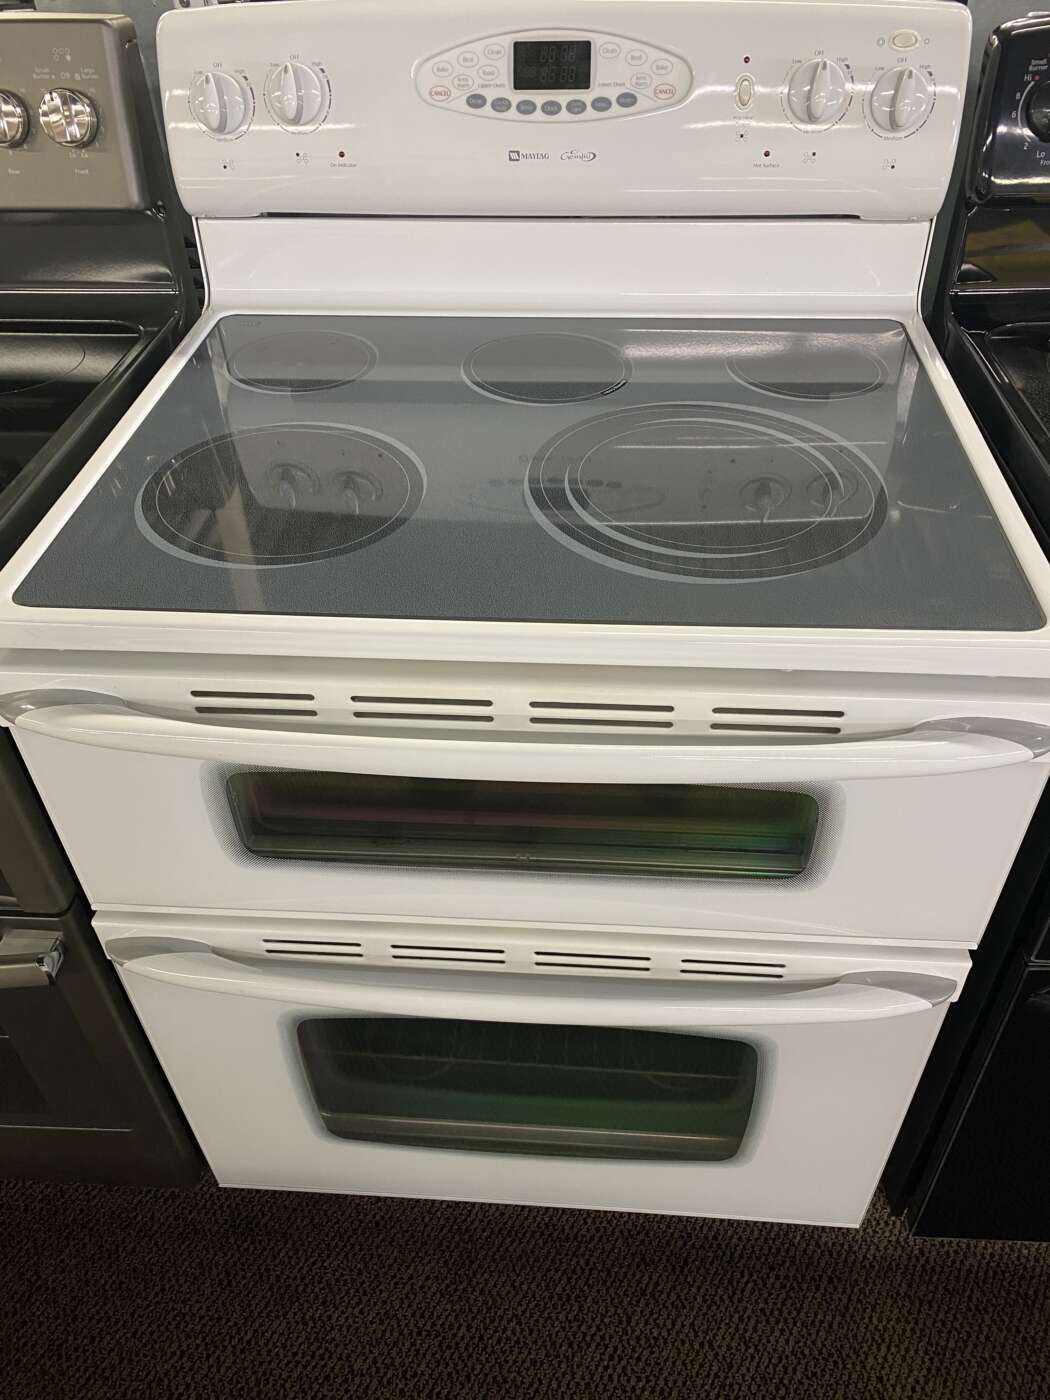 Reconditioned MAYTAG 6.3 Cu. Ft. Electric Double Oven